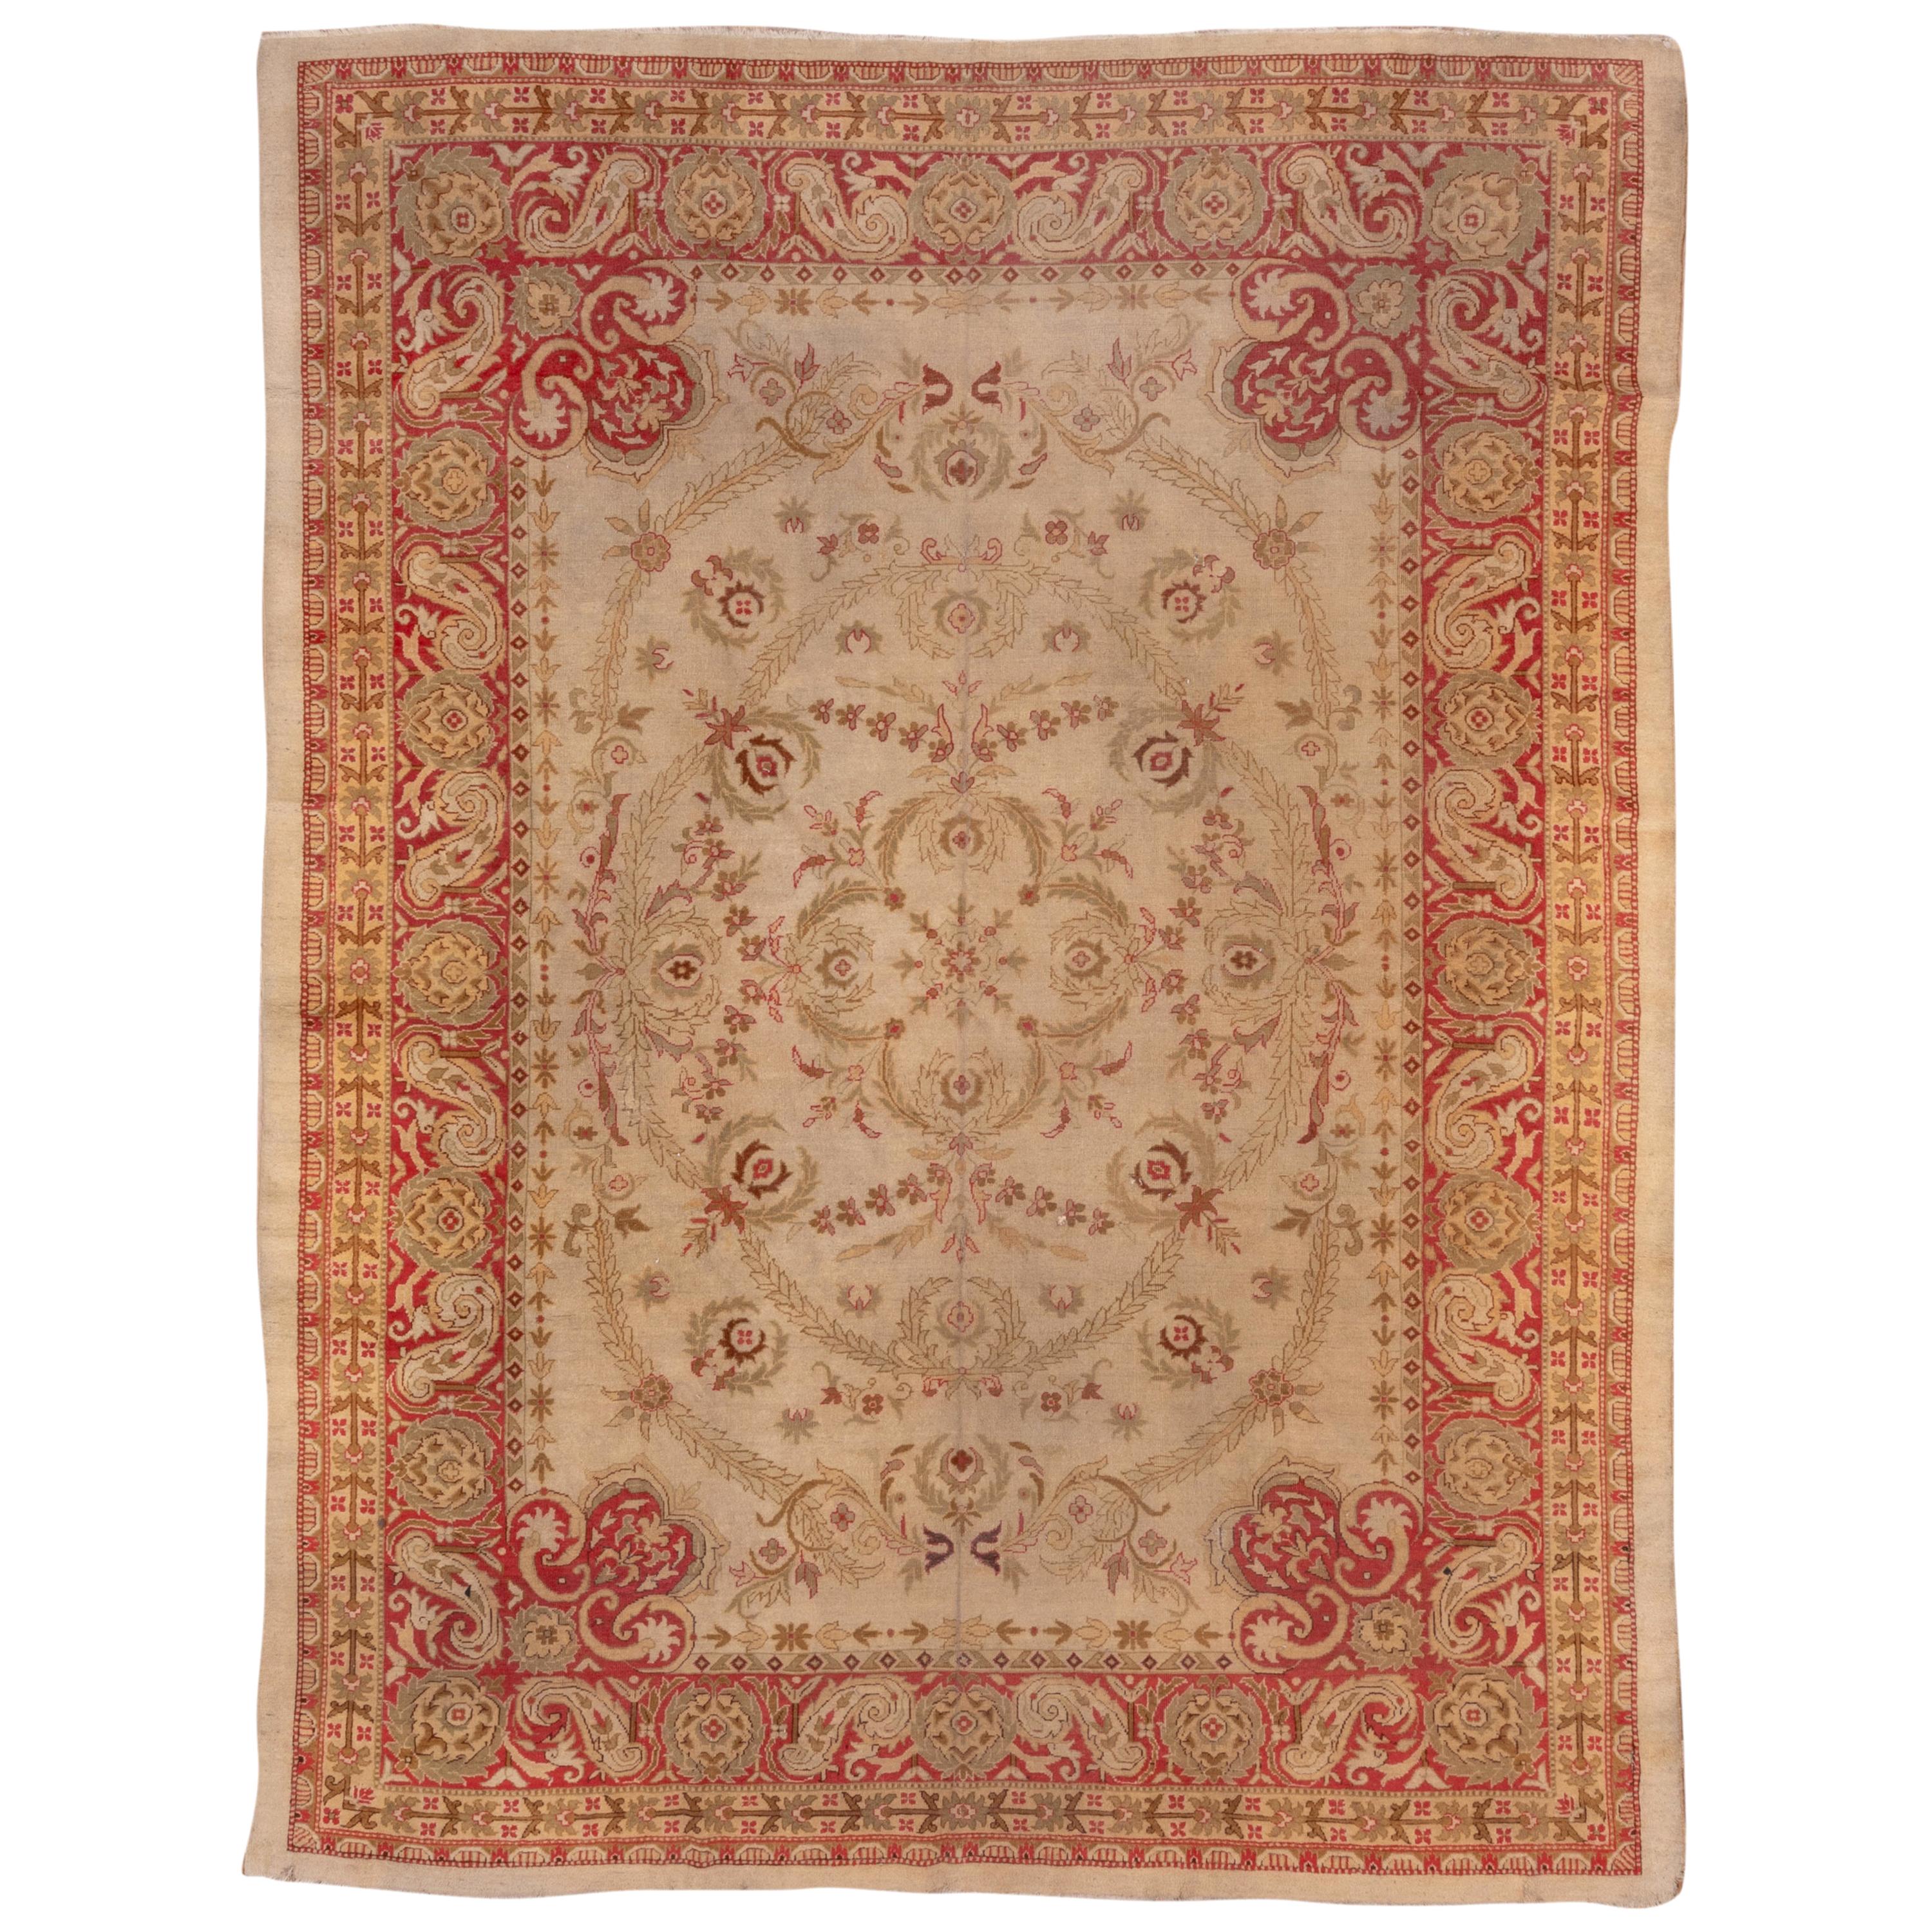 Antique Indian Agra Carpet, Yellow and Red Tones, 1910s, Red Border